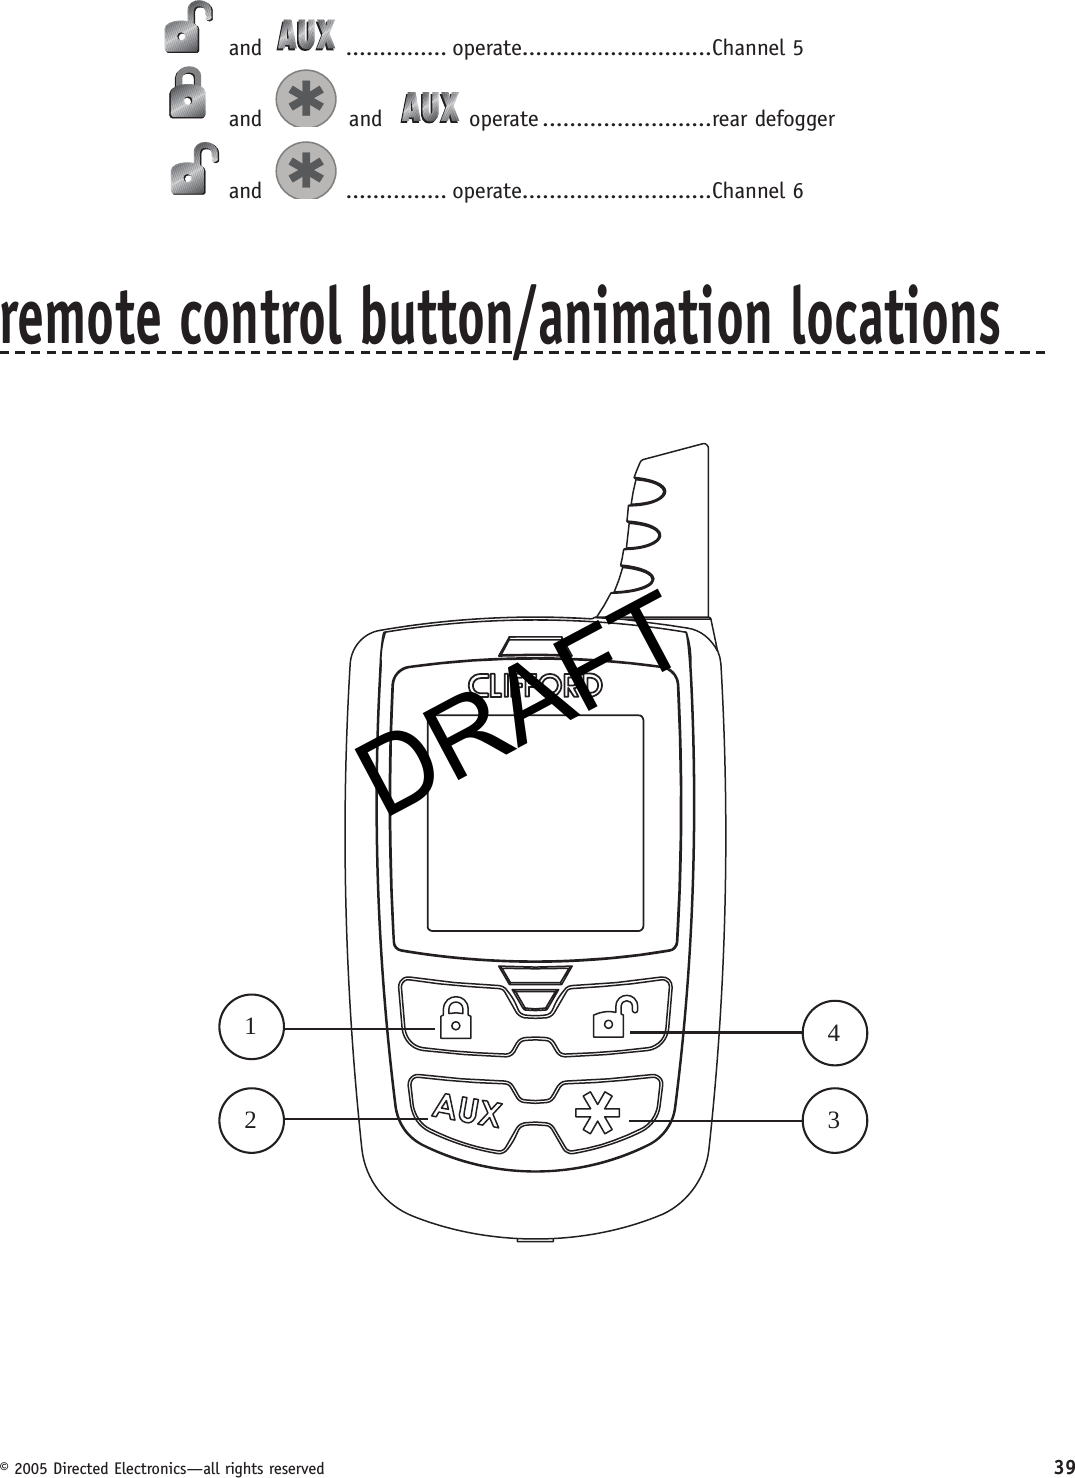 DRAFT© 2005 Directed Electronics—all rights reserved 39 and   ............... operate............................Channel  5 and   and    operate .........................rear  defogger and   ............... operate............................Channel  6remote control button/animation locations12 34DRAFT